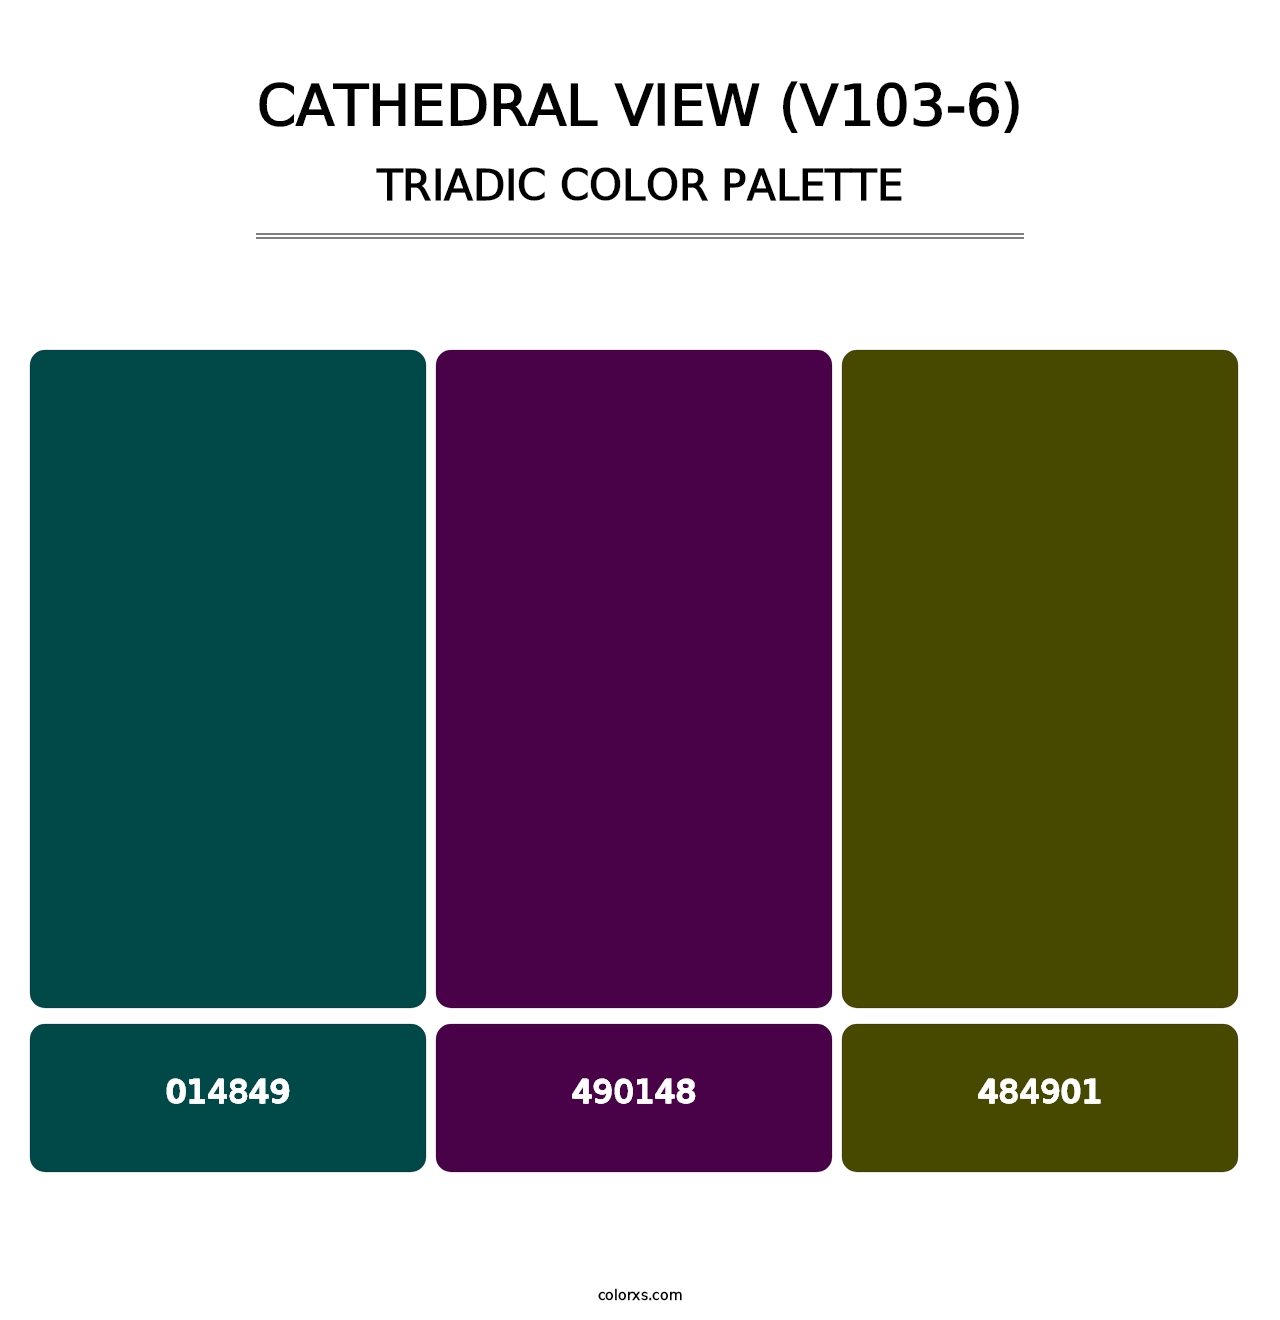 Cathedral View (V103-6) - Triadic Color Palette